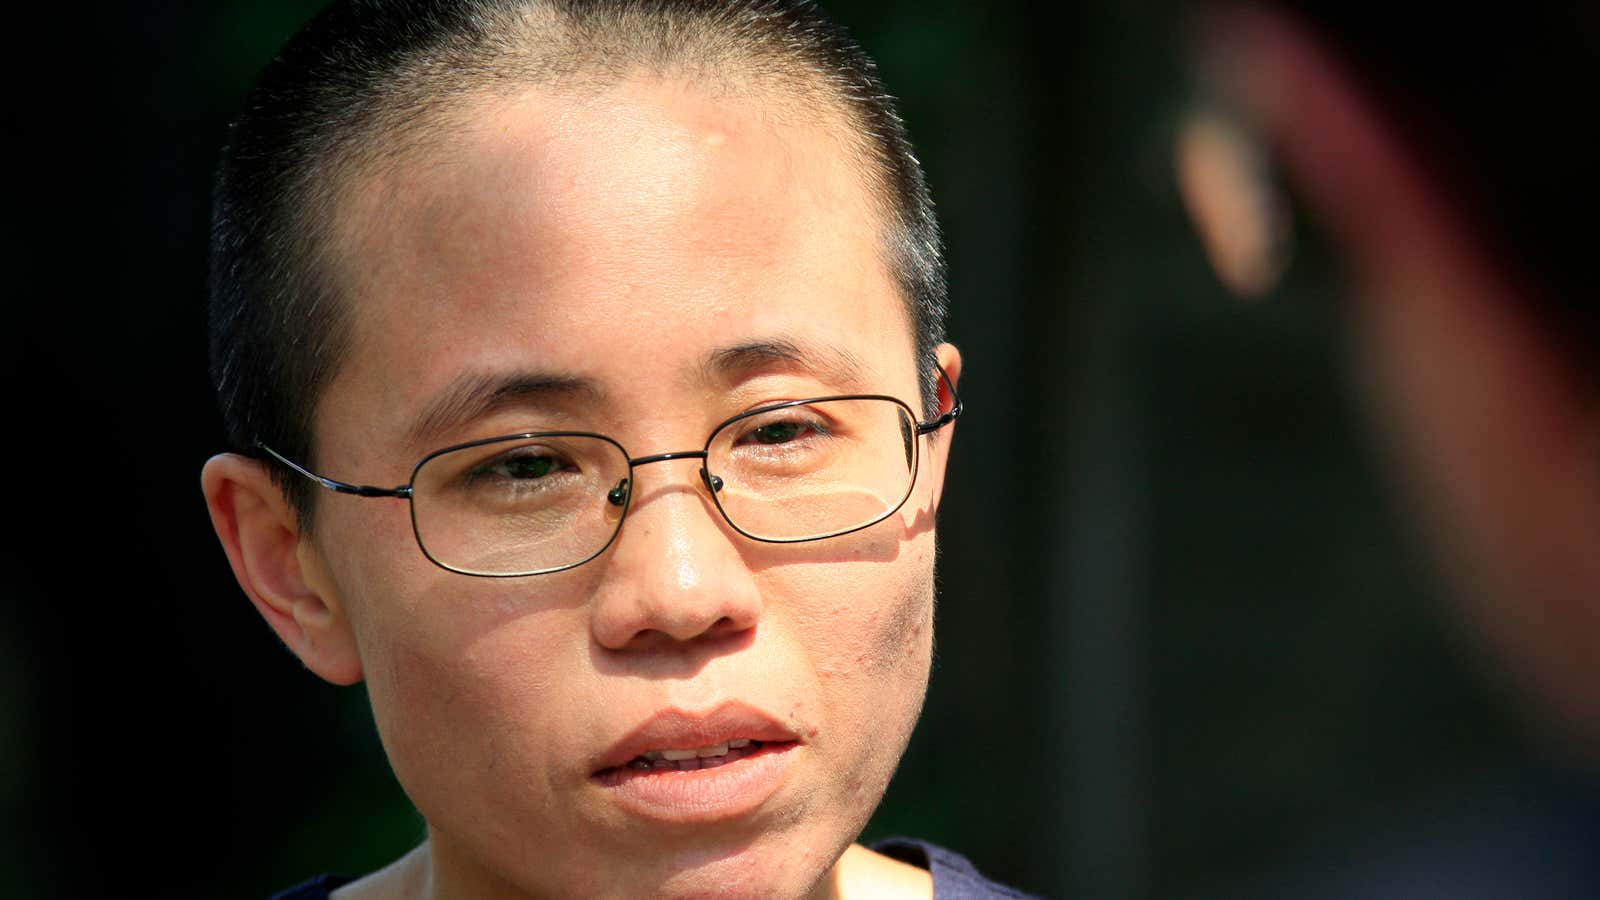 Liu Xia, wife of veteran Chinese pro-democracy activist Liu Xiaobo, was placed under house arrest in 2010.